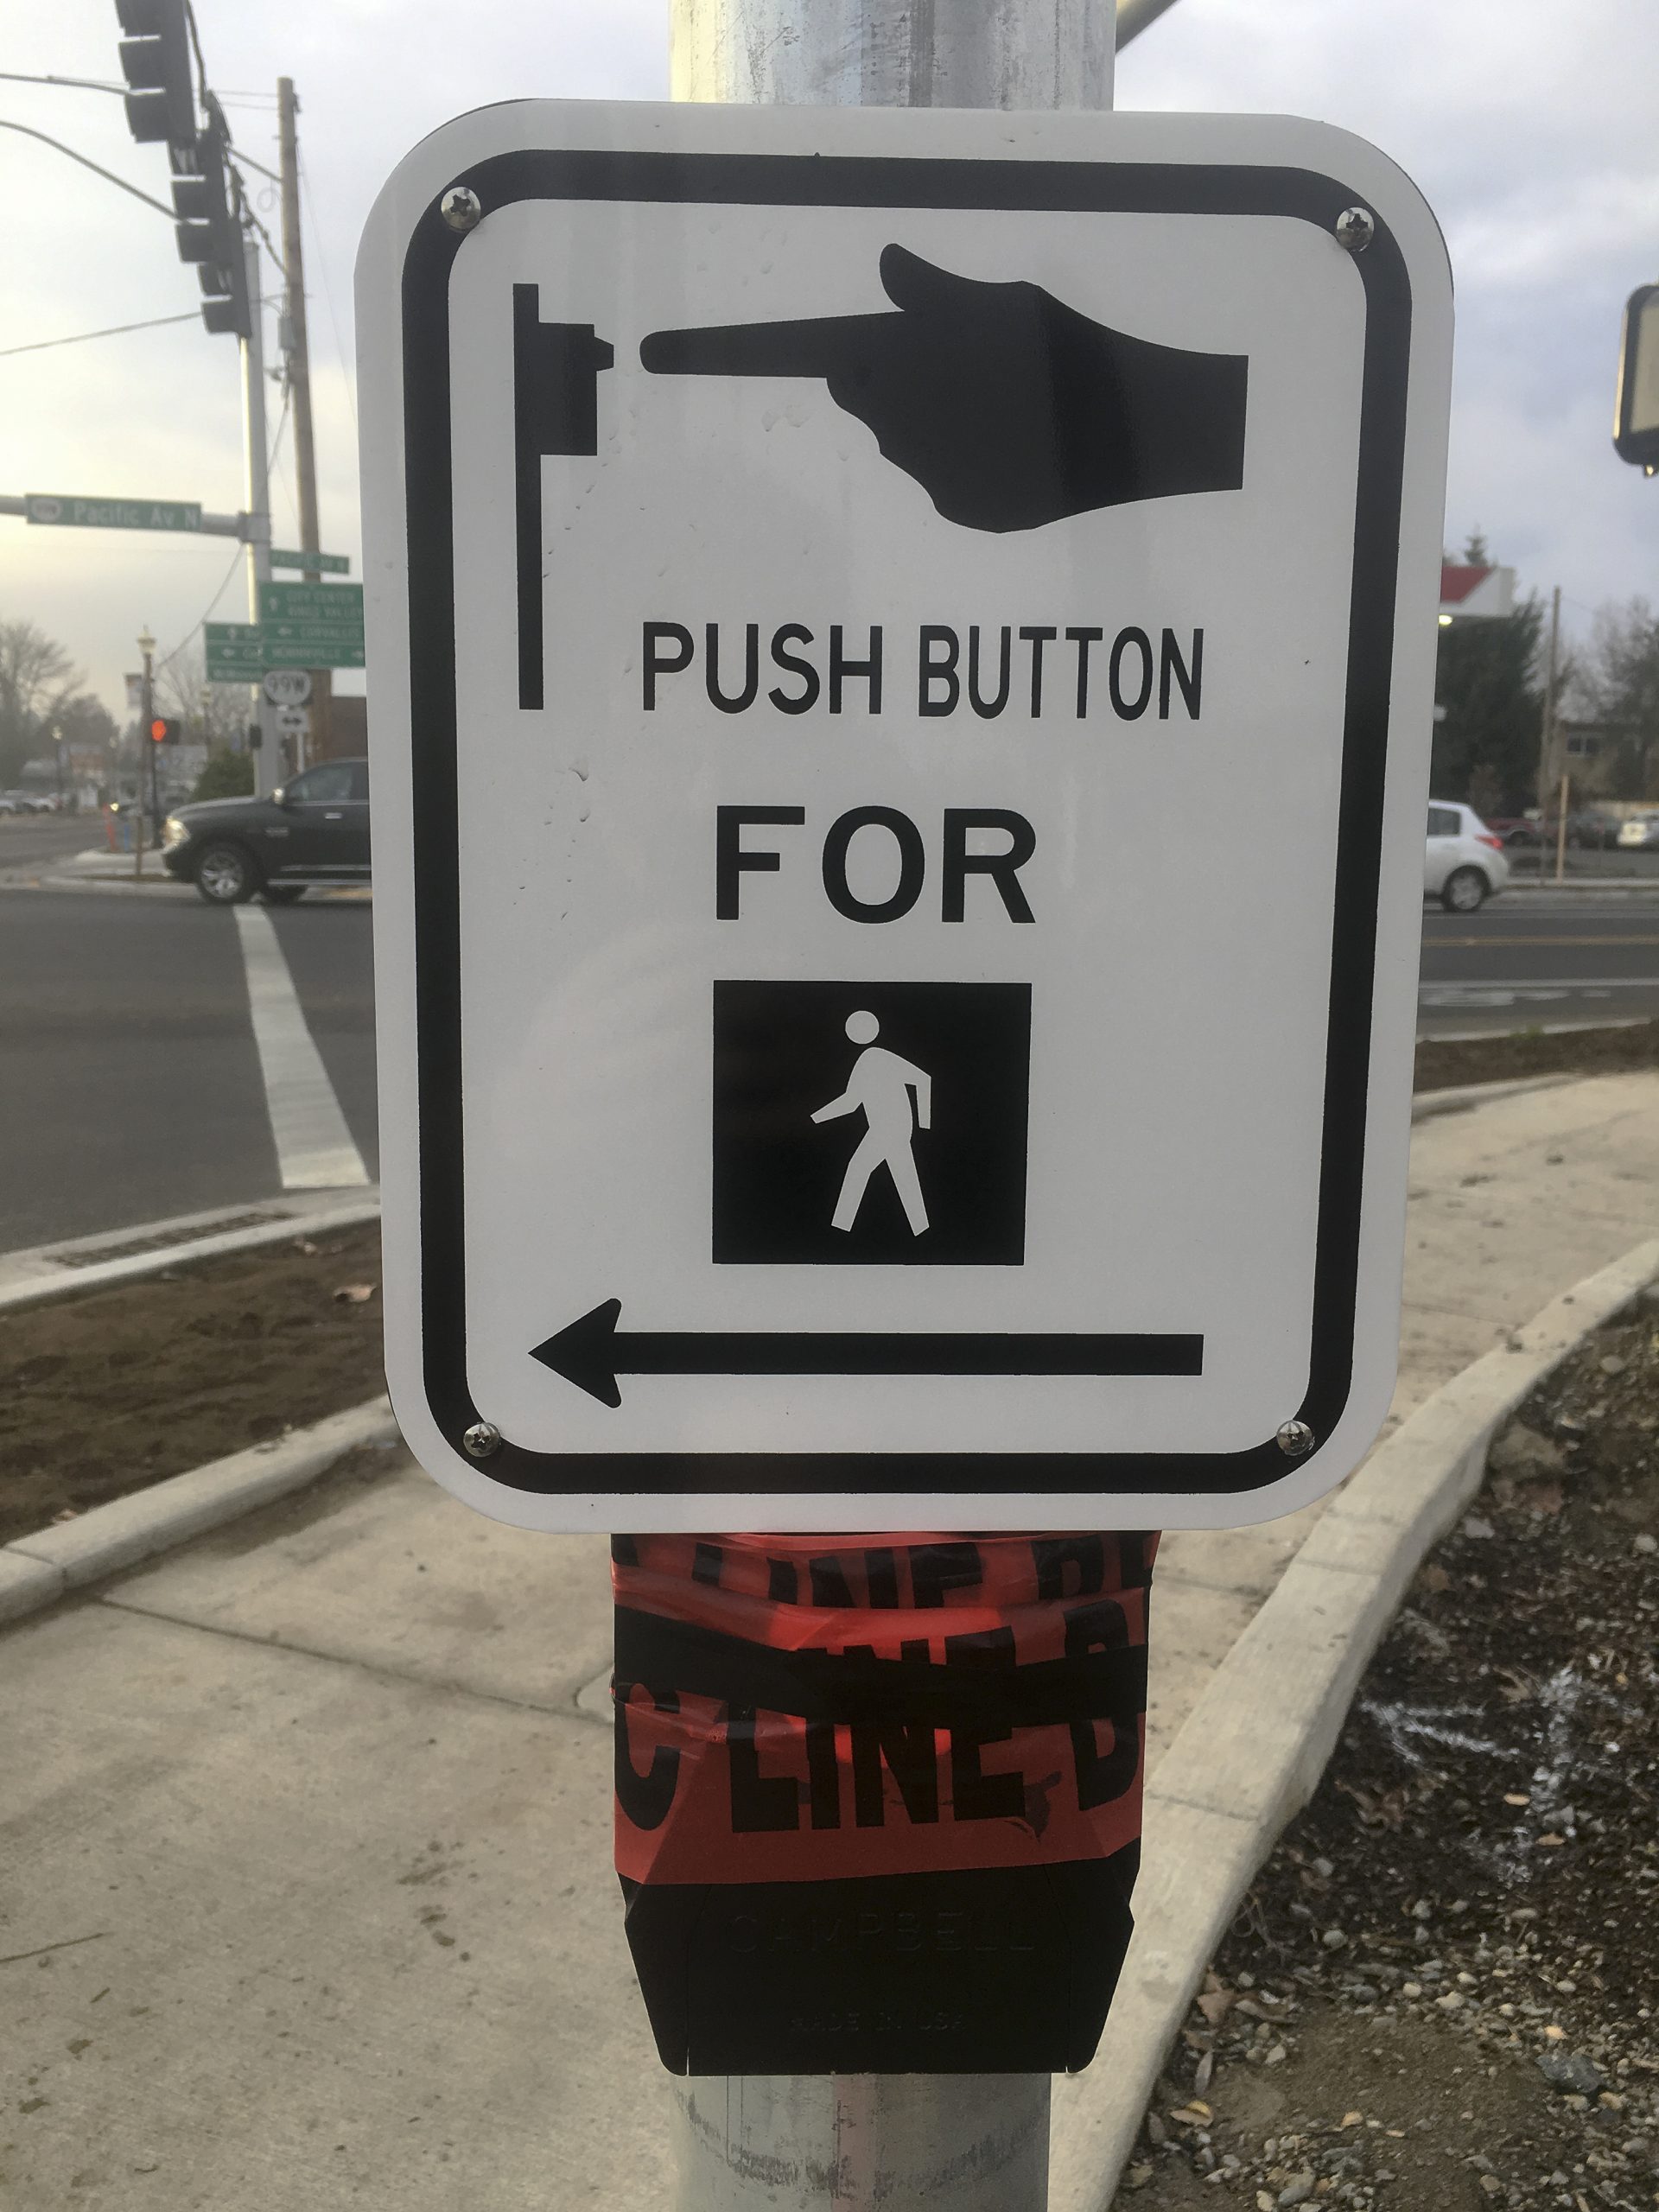 An Accessible Pedestrian Signal has been implemented after conversations about accessibility for Monmouth’s DeafBlind community were sparked.